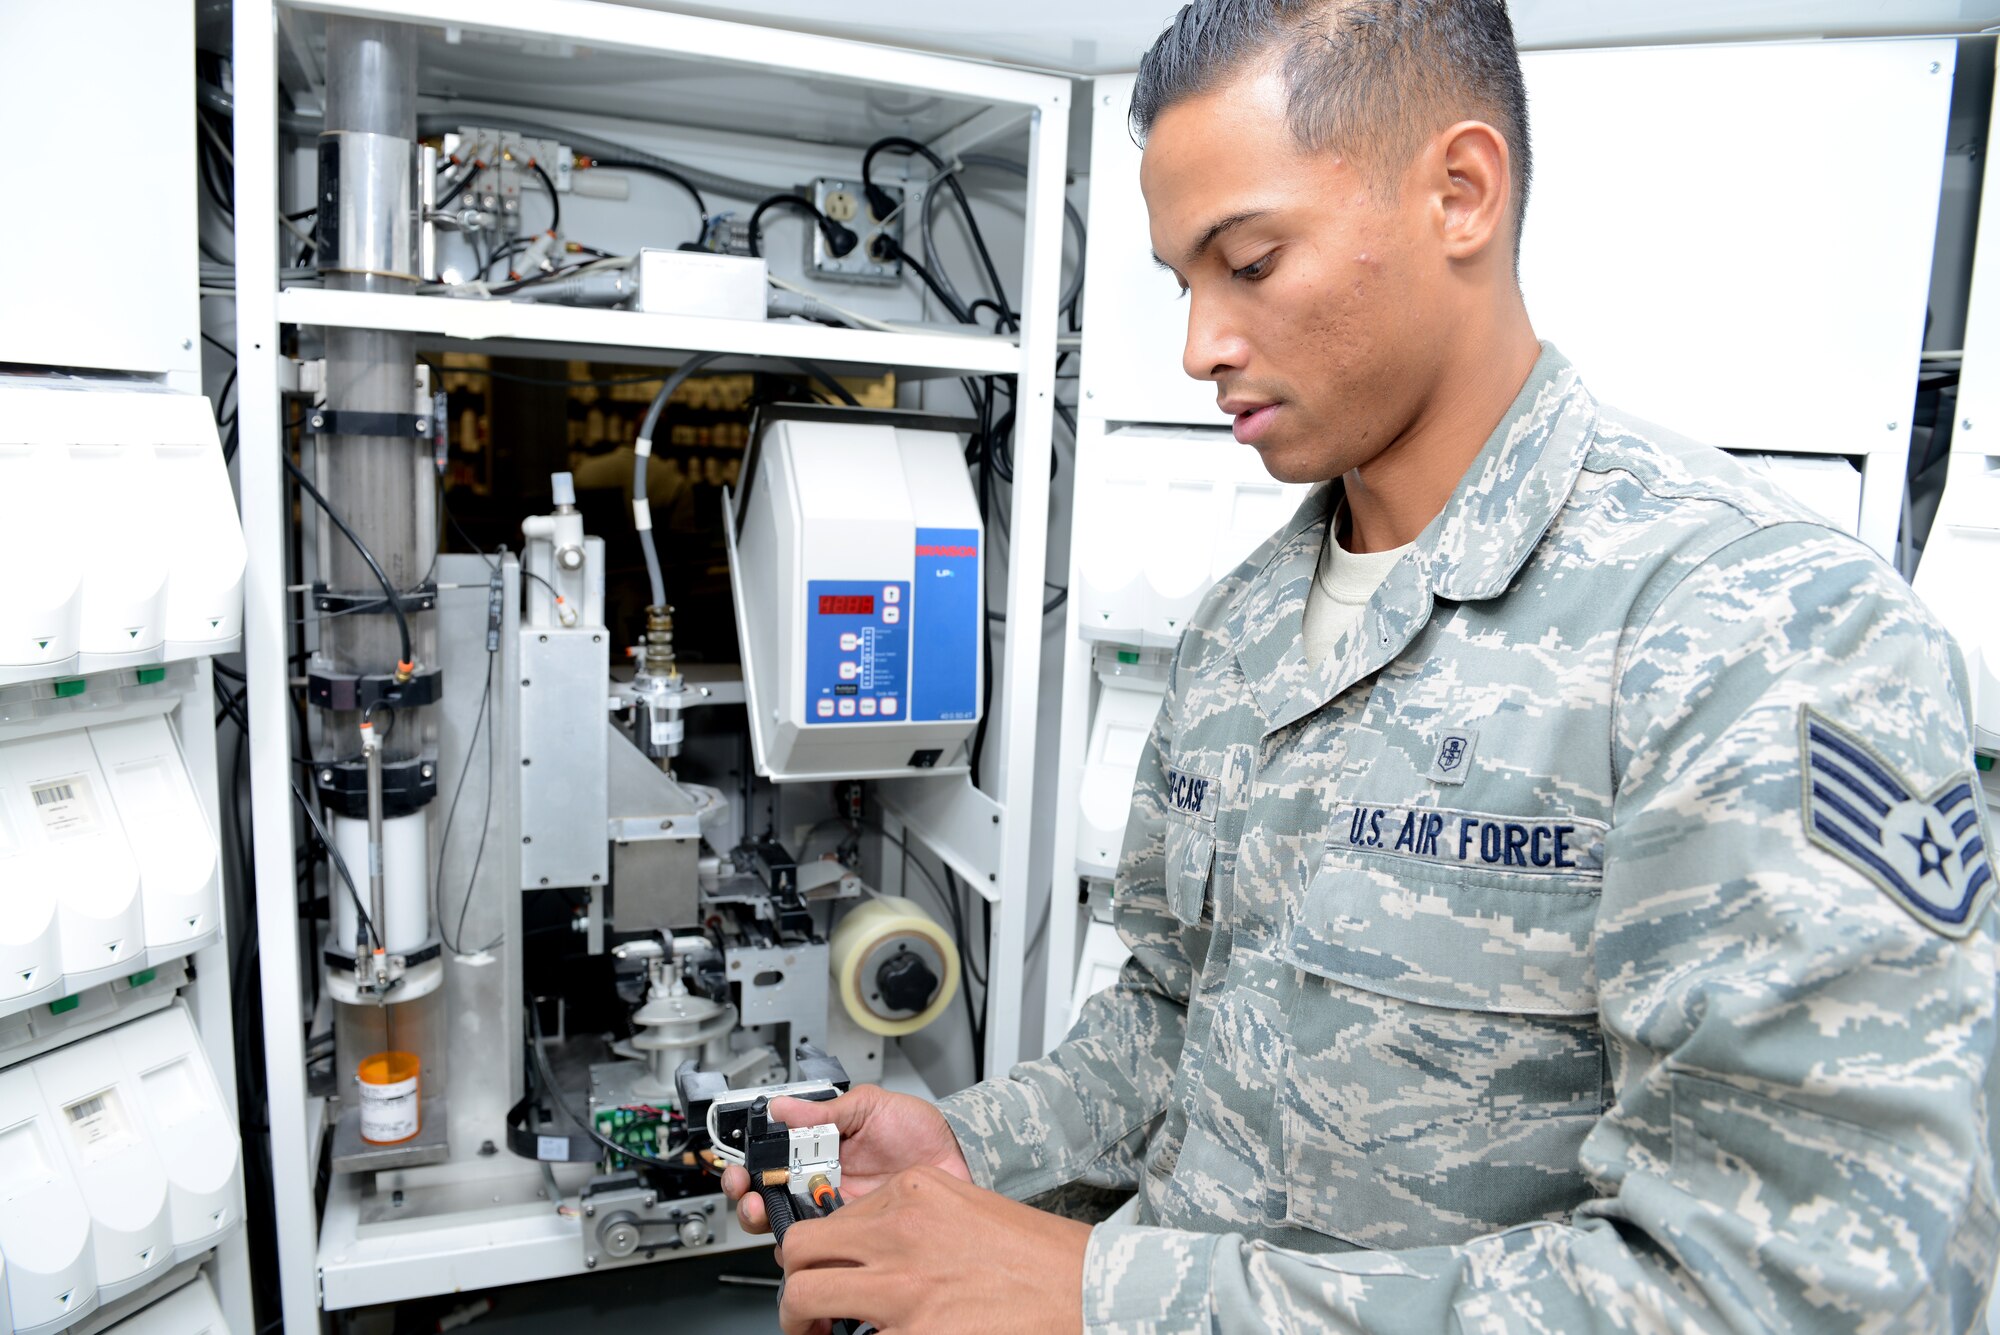 Staff Sgt. Aaron Munoz-Case, 56th Medical Support Squadron Arizona Refilling Center acting NCO in charge, adjusts the robotic arm at Luke Air Force Base, Arizona, Oct. 19, 2015. The robotic arm system helps Airmen at the ARC refill approximately 60 percent of all prescriptions. (U.S. Air Force photo by Senior Airman James Hensley)